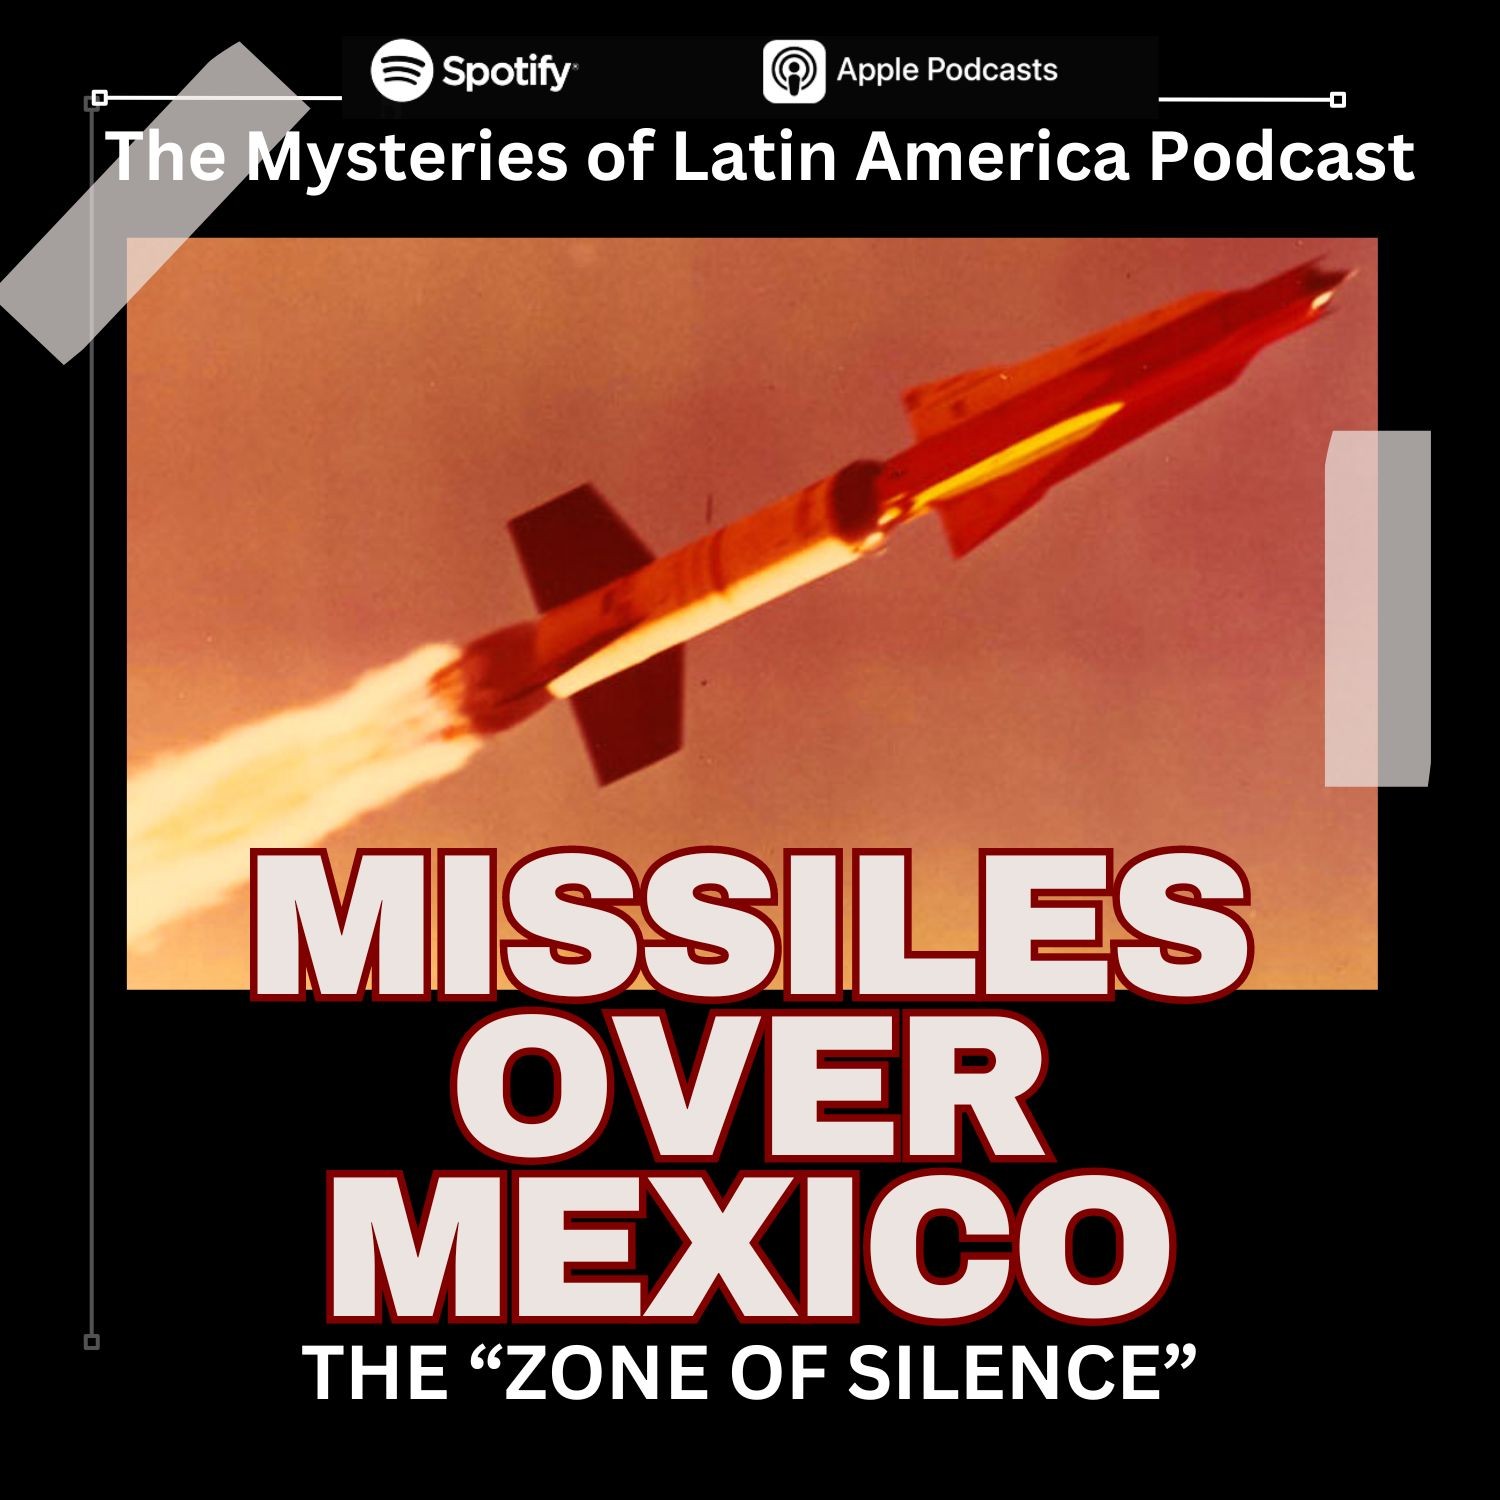 MISSILES OVER MEXICO: THE "ZONE OF SILENCE"